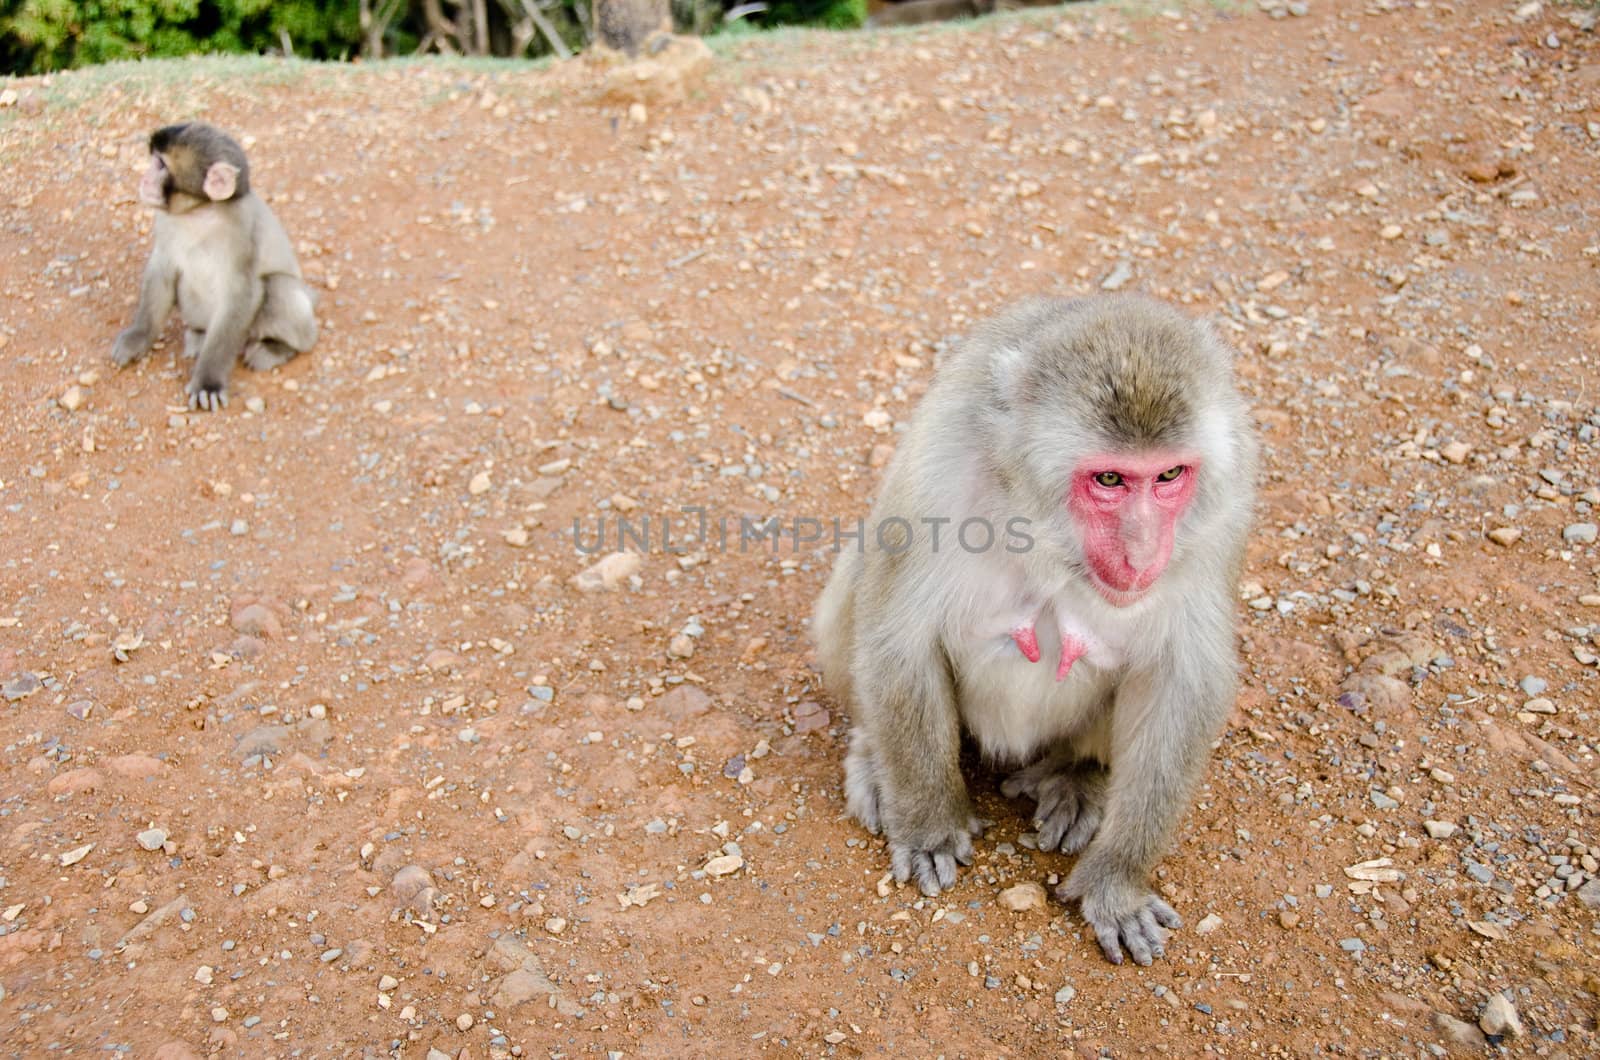 Female japanese macaque, Macaca fuscata, sitting on the ground with macaque baby in the background